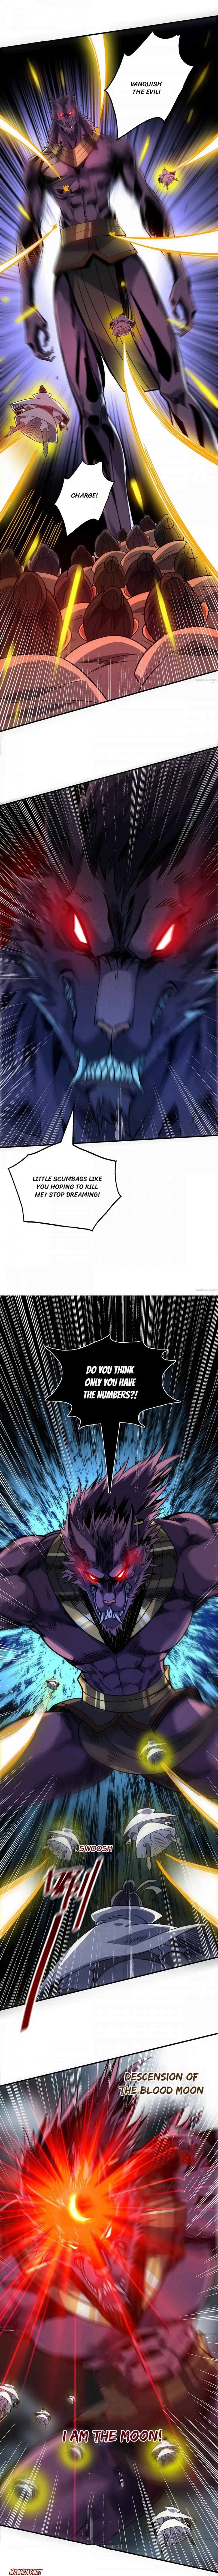 The First Son-In-Law Vanguard of All Time Chapter 79 page 4